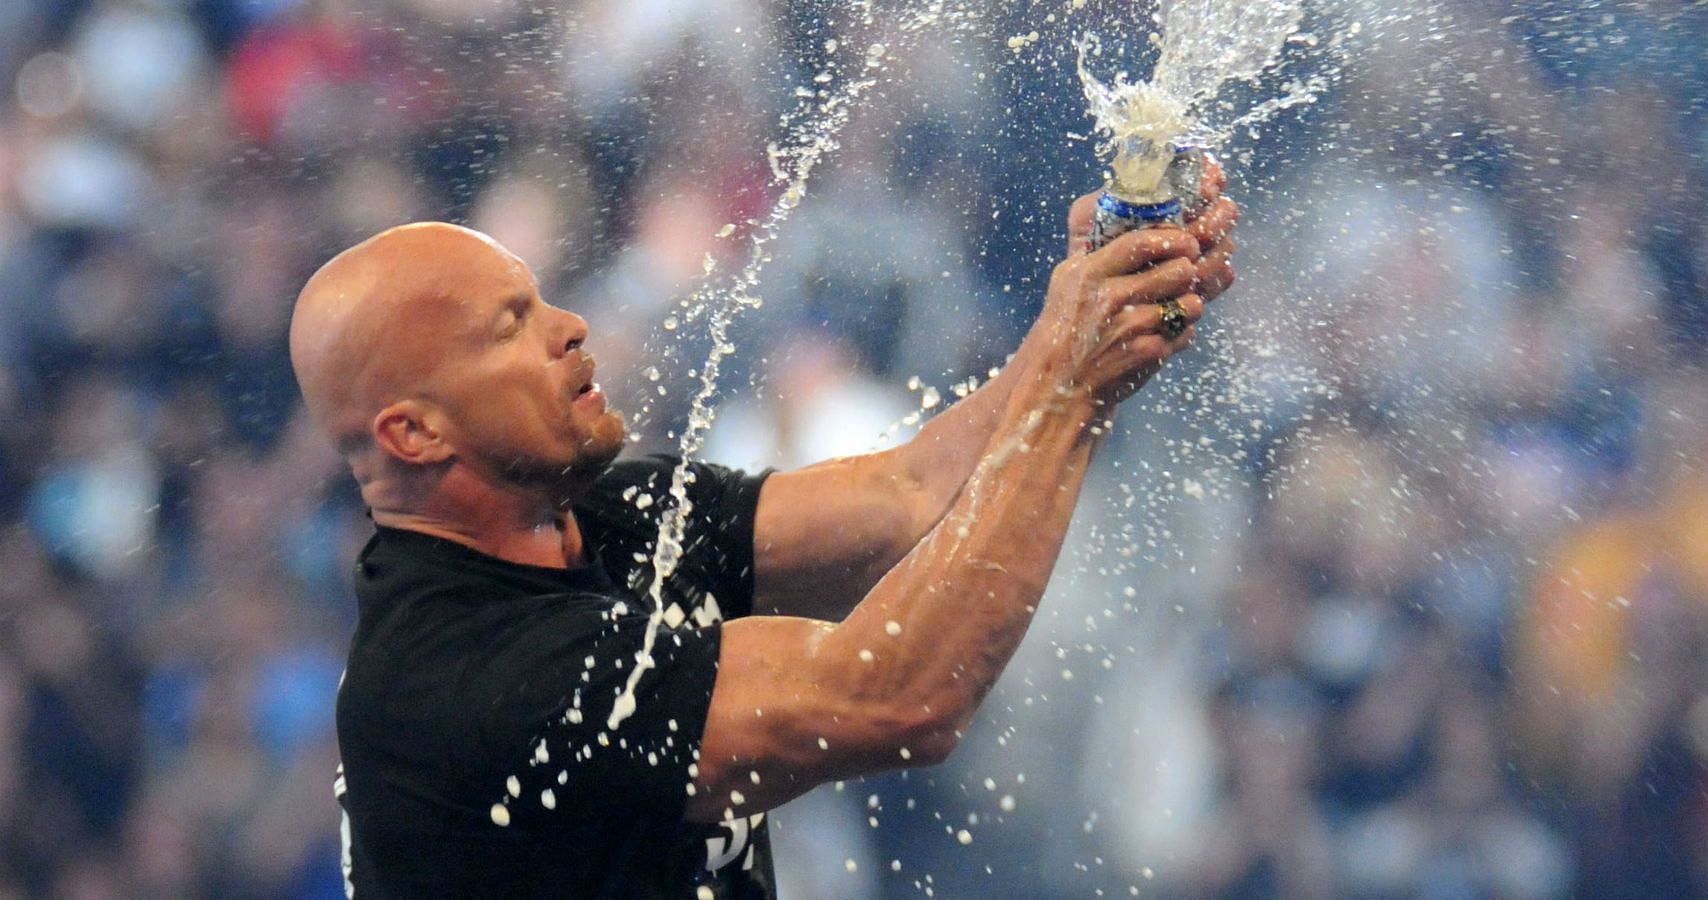 &quot;Stone Cold&quot; Steve Austin wins No Holds Barred Match against Kevin Owens